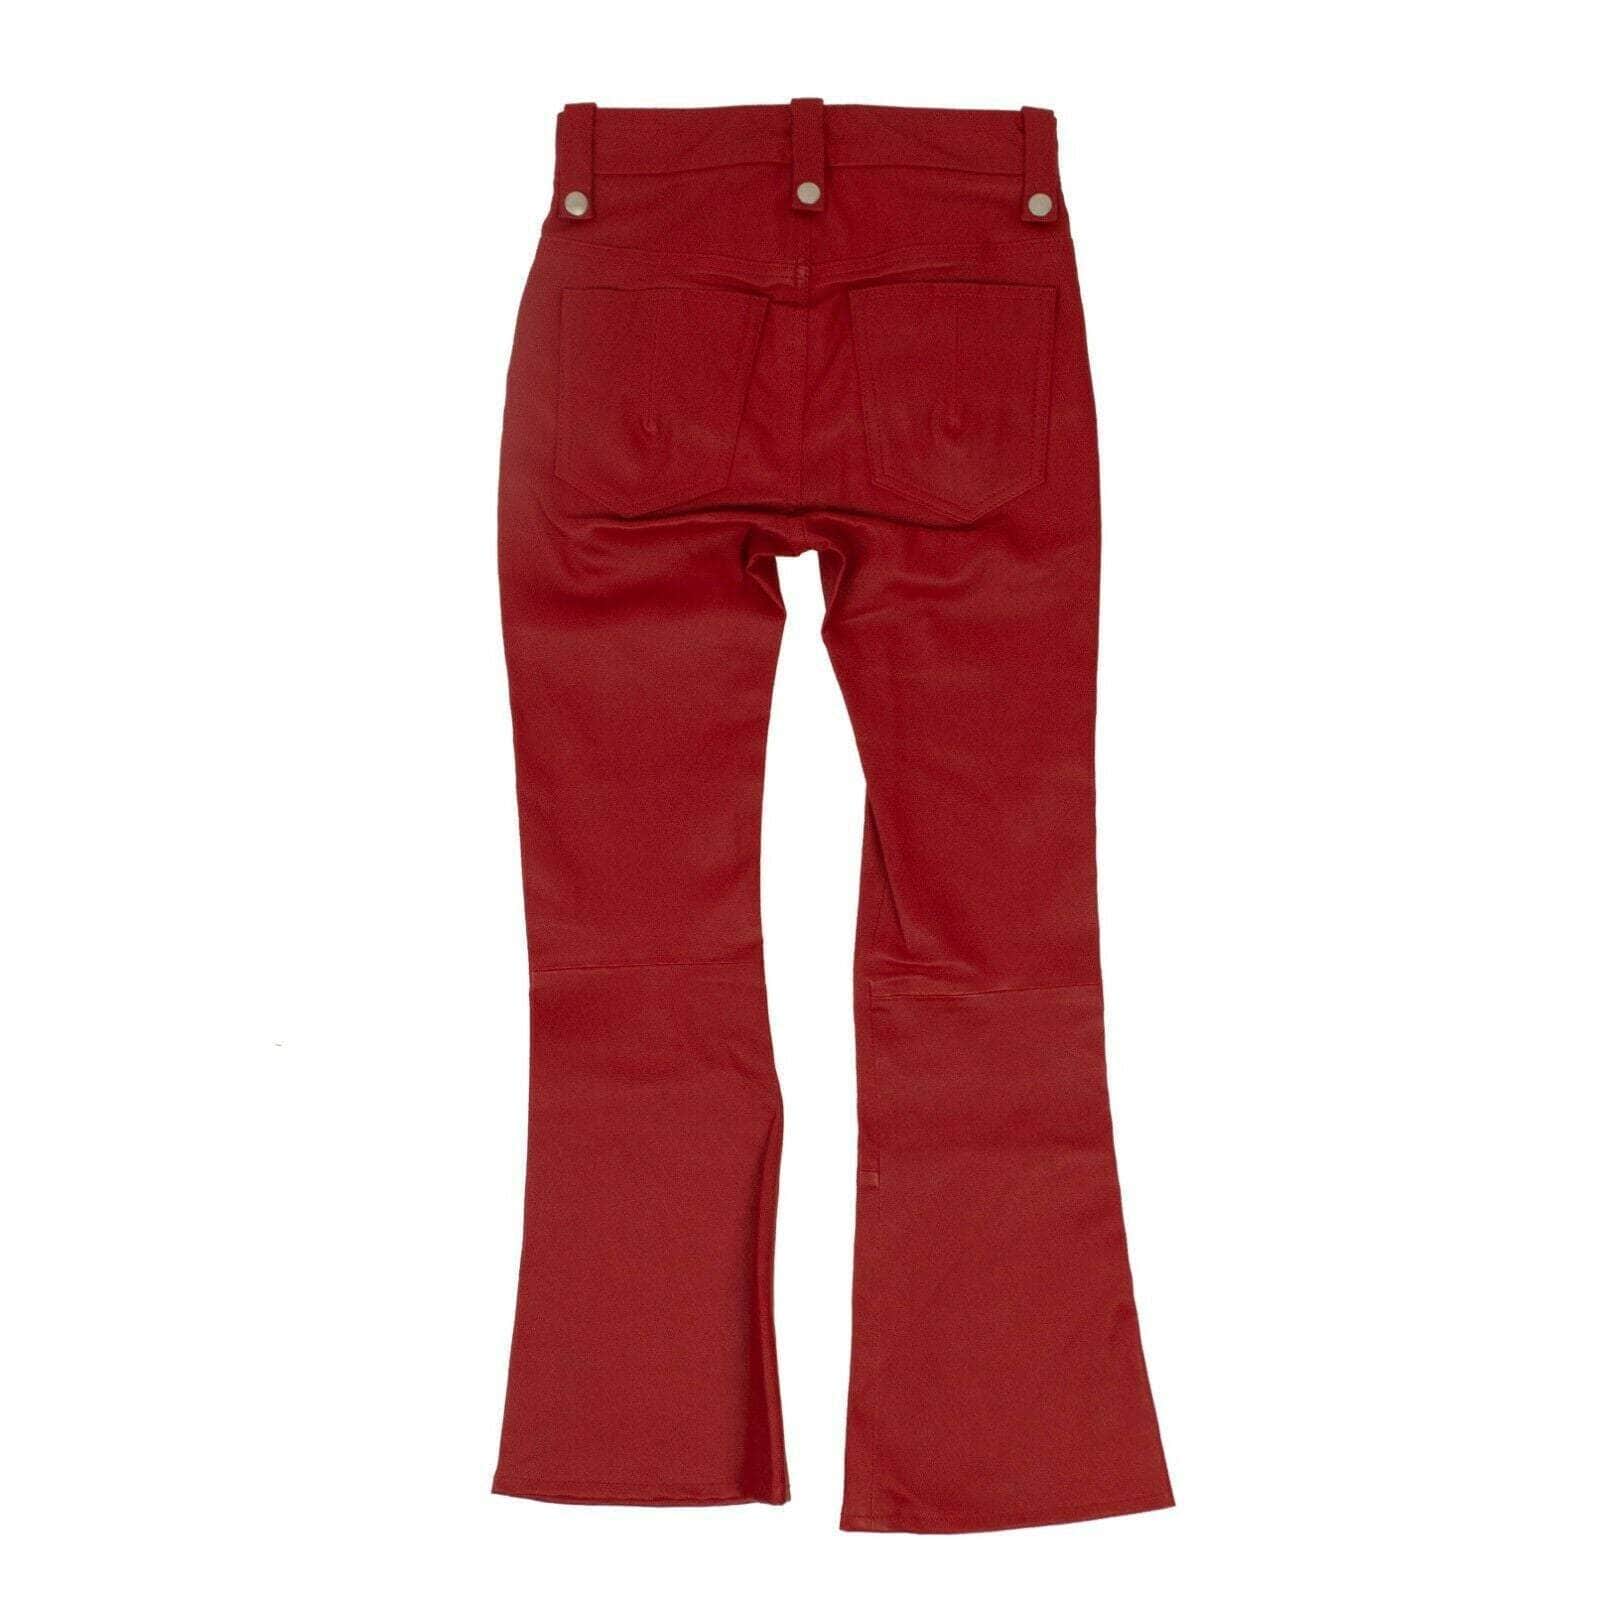 Unravel Project Women's Pants 26 Leather Cropped Plonge Lace-Up Pants - Red 74NGG-UN-1013/26 74NGG-UN-1013/26